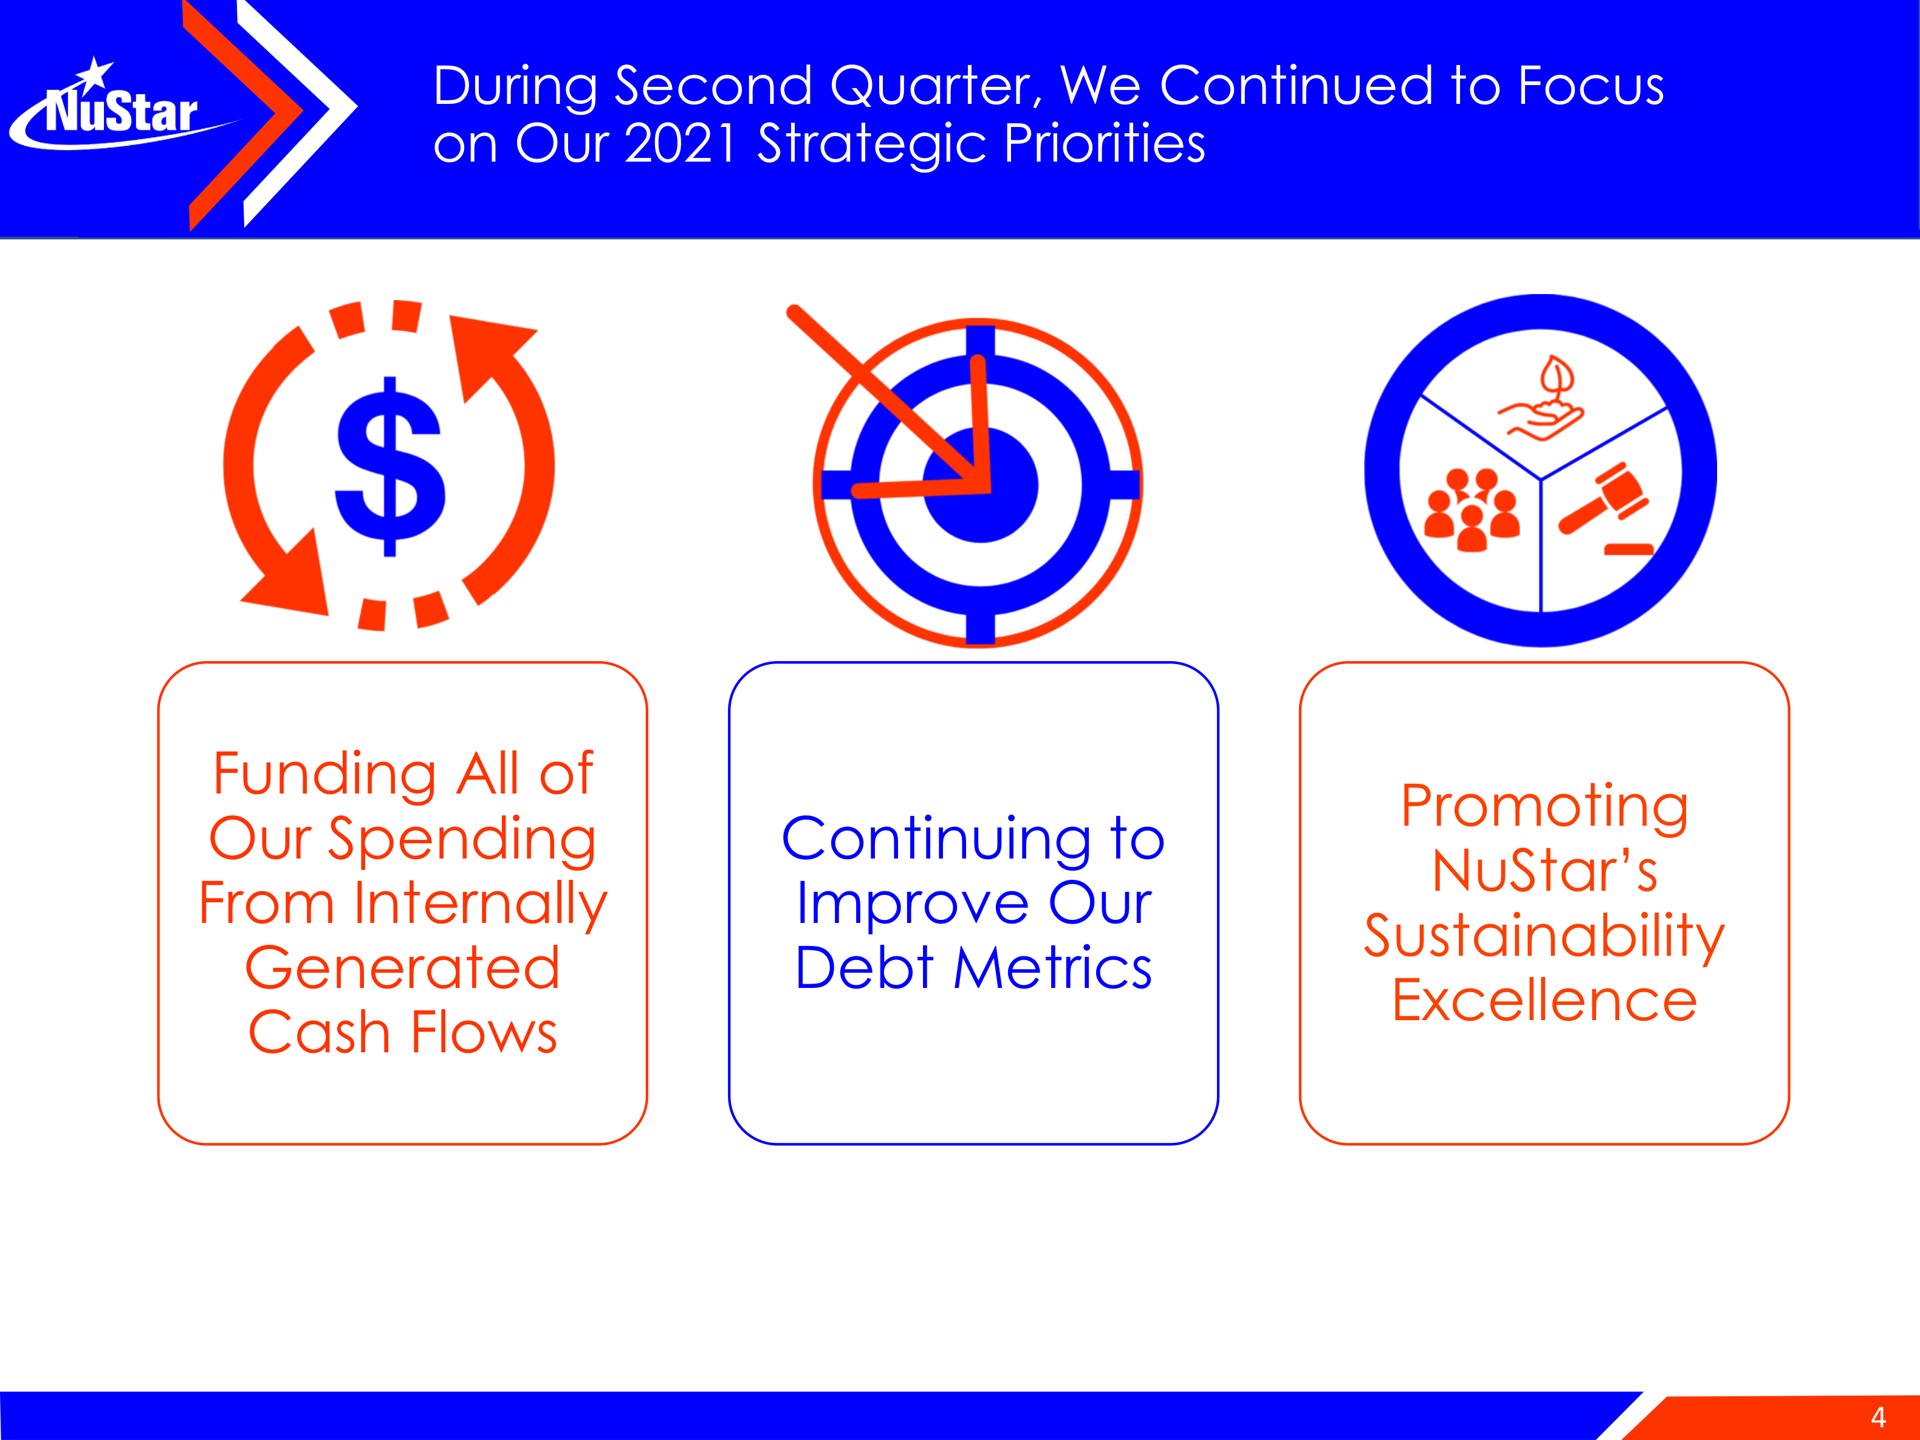 funding all of our spending from internally generated cash flows continuing to improve our debt metrics promoting excellence during second quarter we continued focus on strategic priorities | NuStar Energy